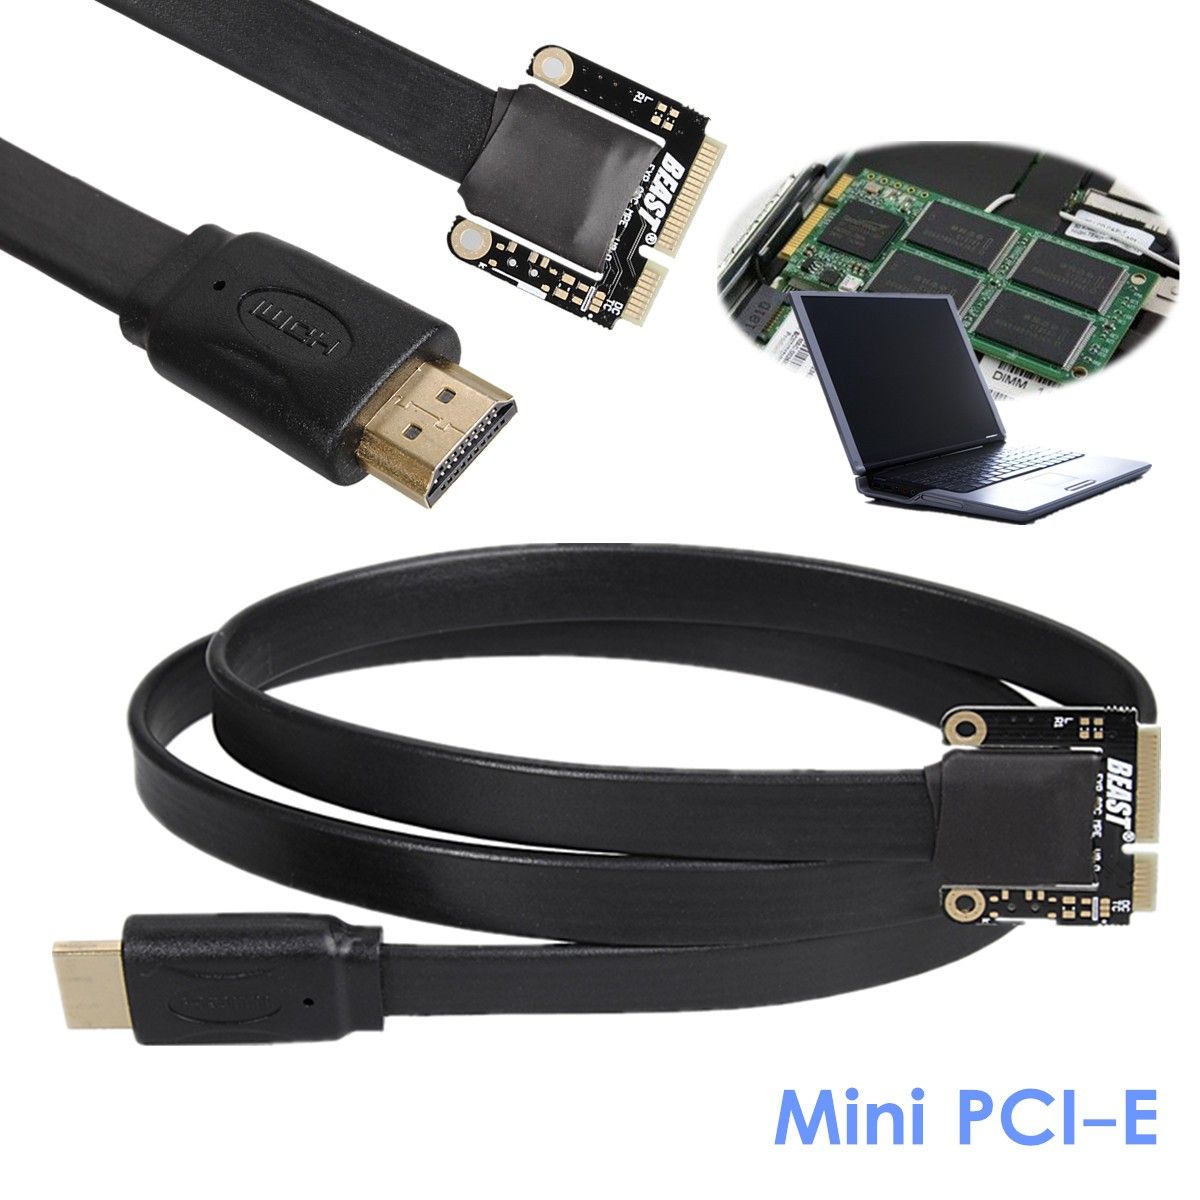 Mini-PCI-E-to-HD-Multimedia-Interface-for-V80-EXP-GDC-Beast-Laptop-External-Independent-Video-Card-968884